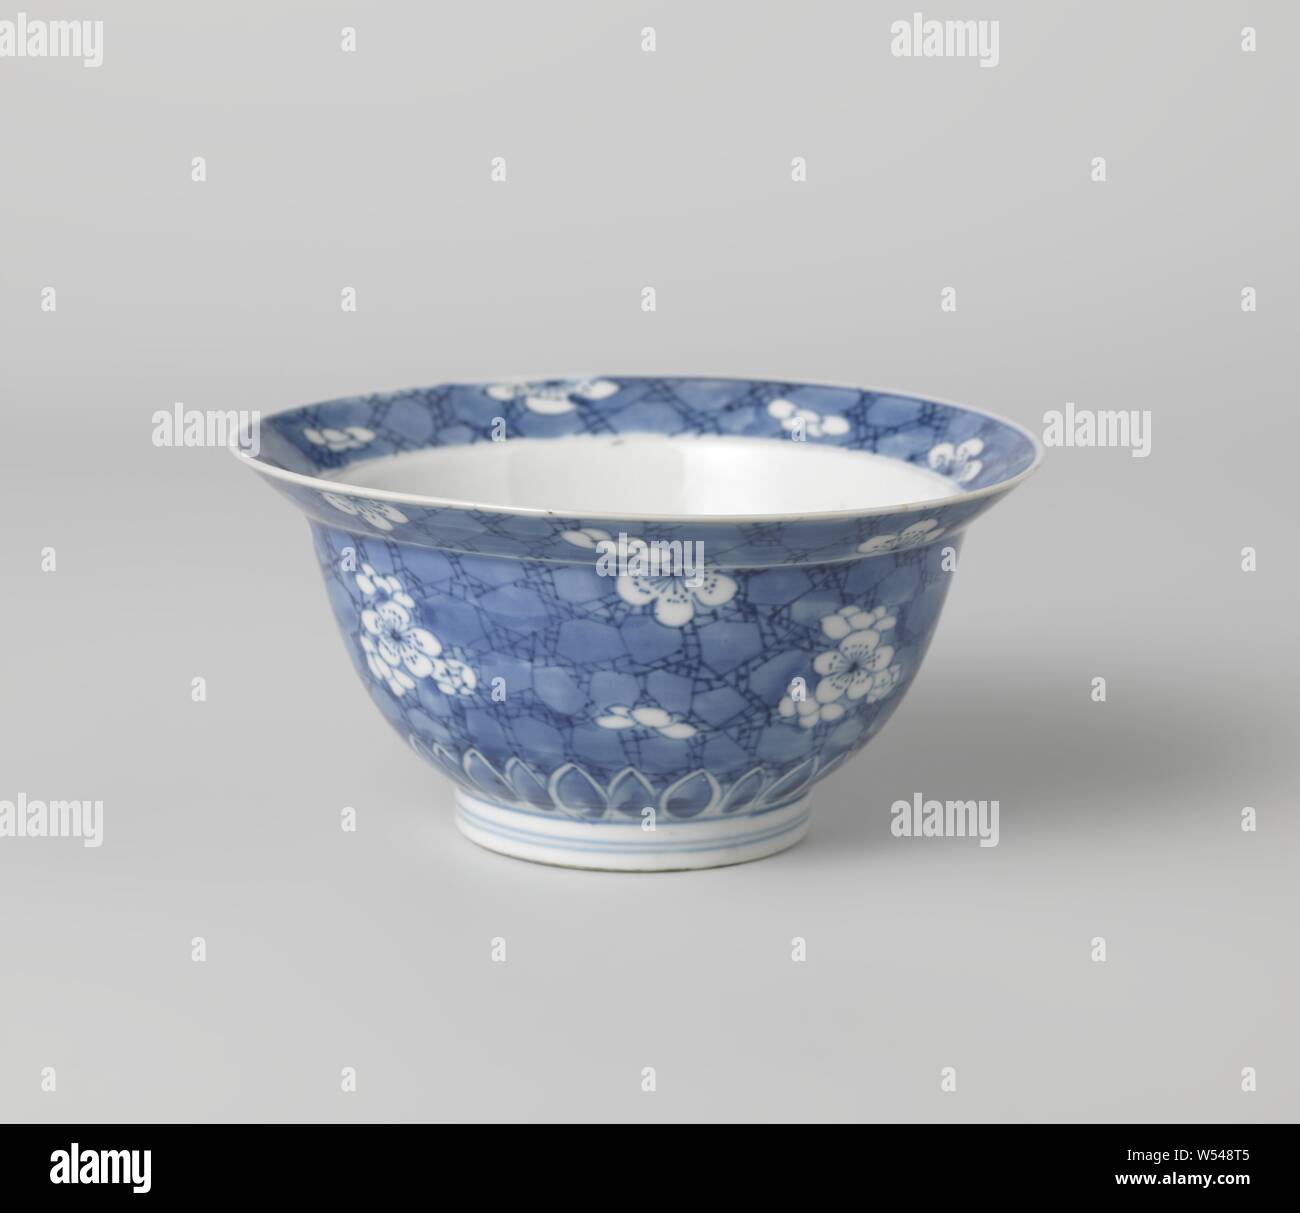 Bowl (folding hat) with plumblossom on 'crackled ice', Bowl (folding hat) of porcelain, painted in underglaze blue. On the outside wall, the bottom and inside and outside edge 'crackled ice' with recessed plum blossoms. The underside of the outer wall with a band of pointed leaf motifs. Marked on the bottom with an incense burner in a double circle. Blue White., anonymous, China, c. 1680 - c. 1720, Qing-dynasty (1644-1912) / Kangxi-period (1662-1722), porcelain (material), glaze, cobalt (mineral), painting, h 7.6 cm d 15.5 cm d 6.8 cm Stock Photo